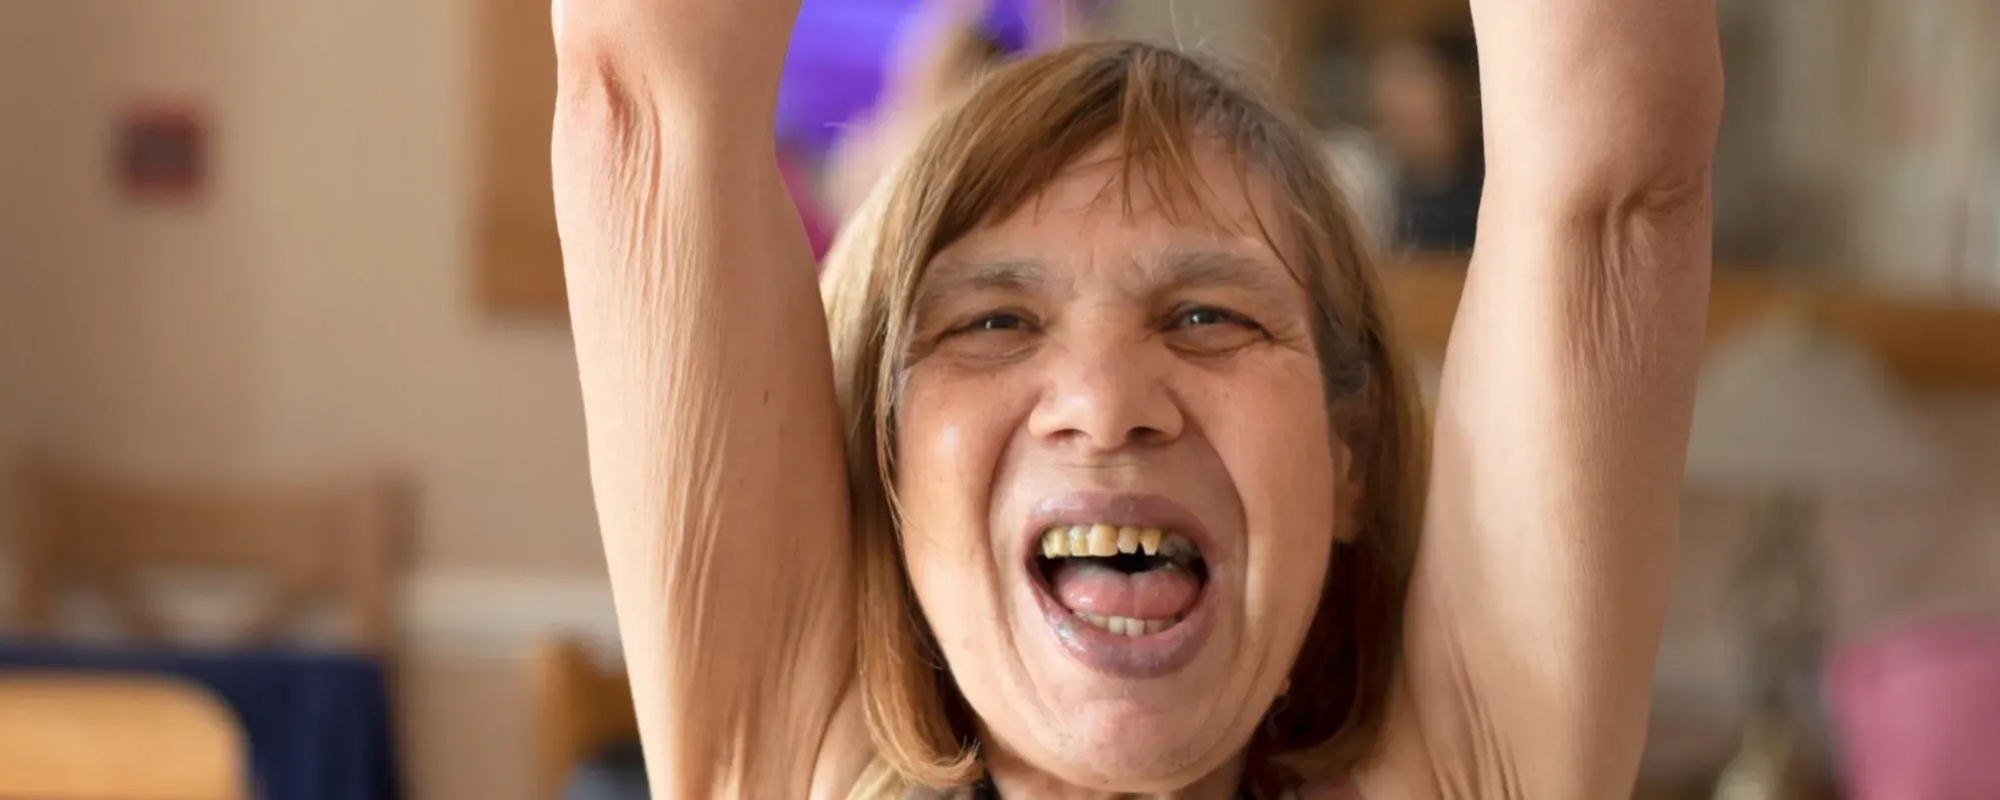 A woman with learning disability raises her arms to the air and cheers